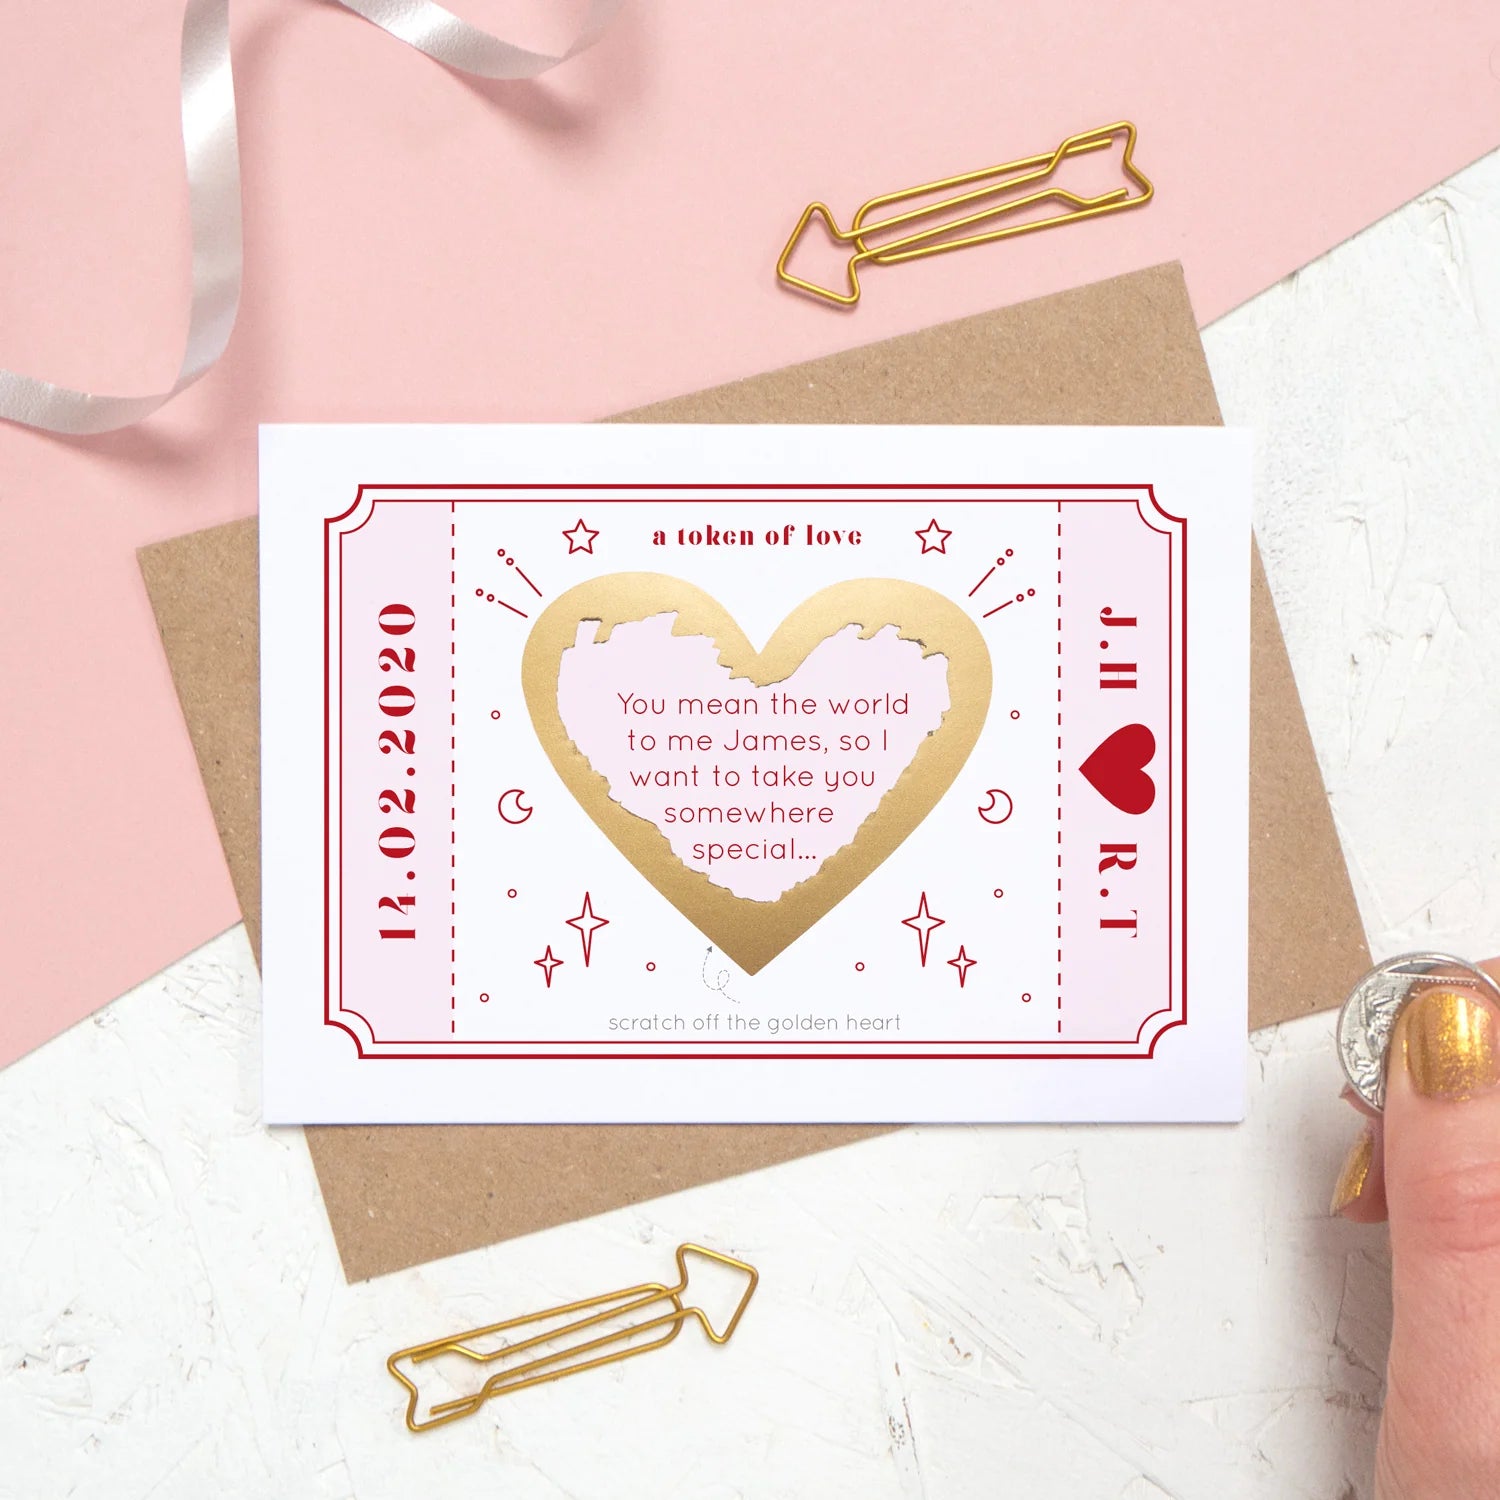 A love token scratch card which has been personalised with a special message, date and initials. It has been photographed on a pink and white background and the gold heart on the card has been scratched off to reveal the message.